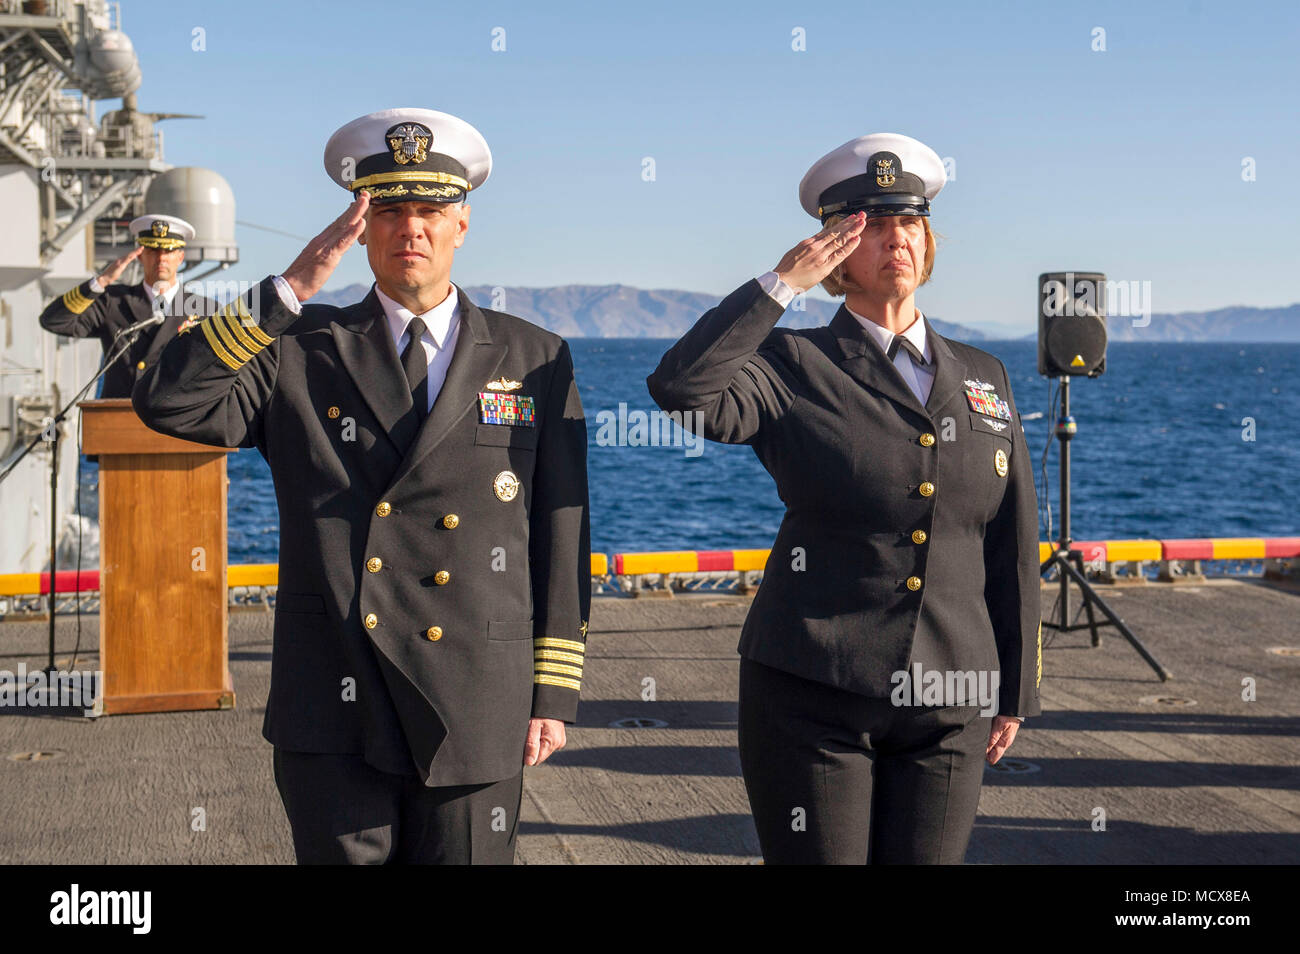 180304-N-ZS023-035 PACIFIC OCEAN (March 4, 2018) Capt. Joseph Olson, commanding officer of the amphibious assault ship USS America (LHA 6), and Command Master Chief Sandra Dyal, render honors during a burial-at-sea ceremony on the ship’s starboard elevator. America is underway off the coast of southern California preparing for an ammunitions offload prior to entering a planned maintenance availability period. (U.S. Navy photo by Mass Communication Specialist 3rd Class Vance Hand/Released) Stock Photo